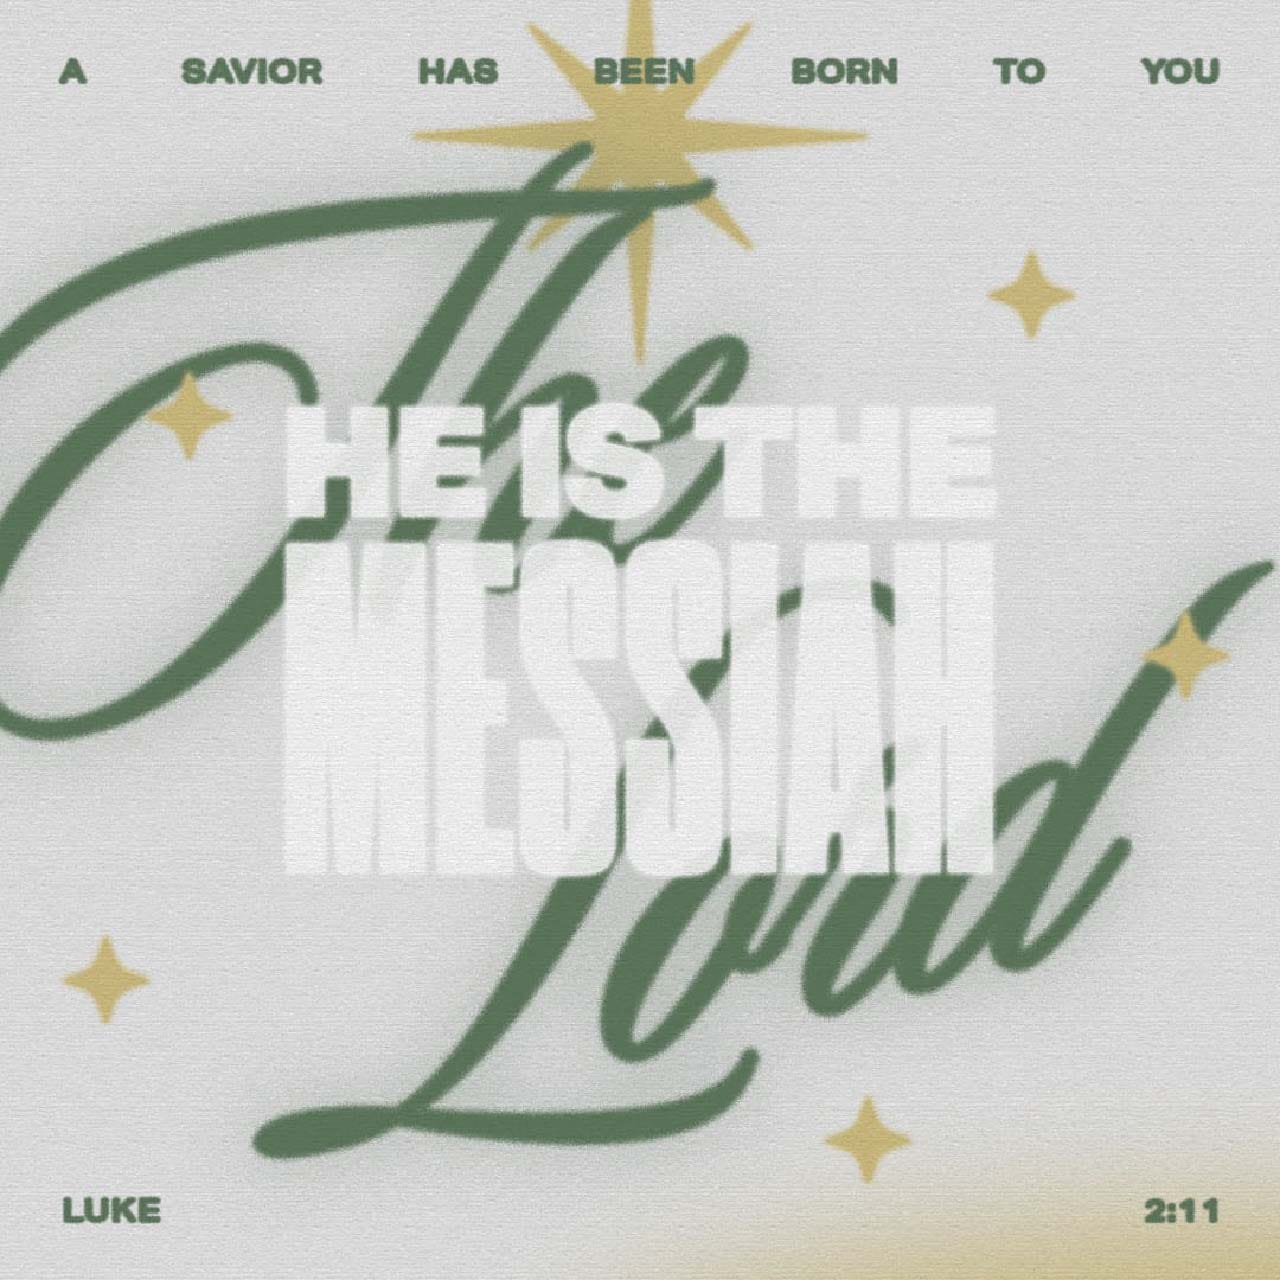 A Savior has been born to you; he is the Messiah, the Lord. - Luke 2:11 Verse Image